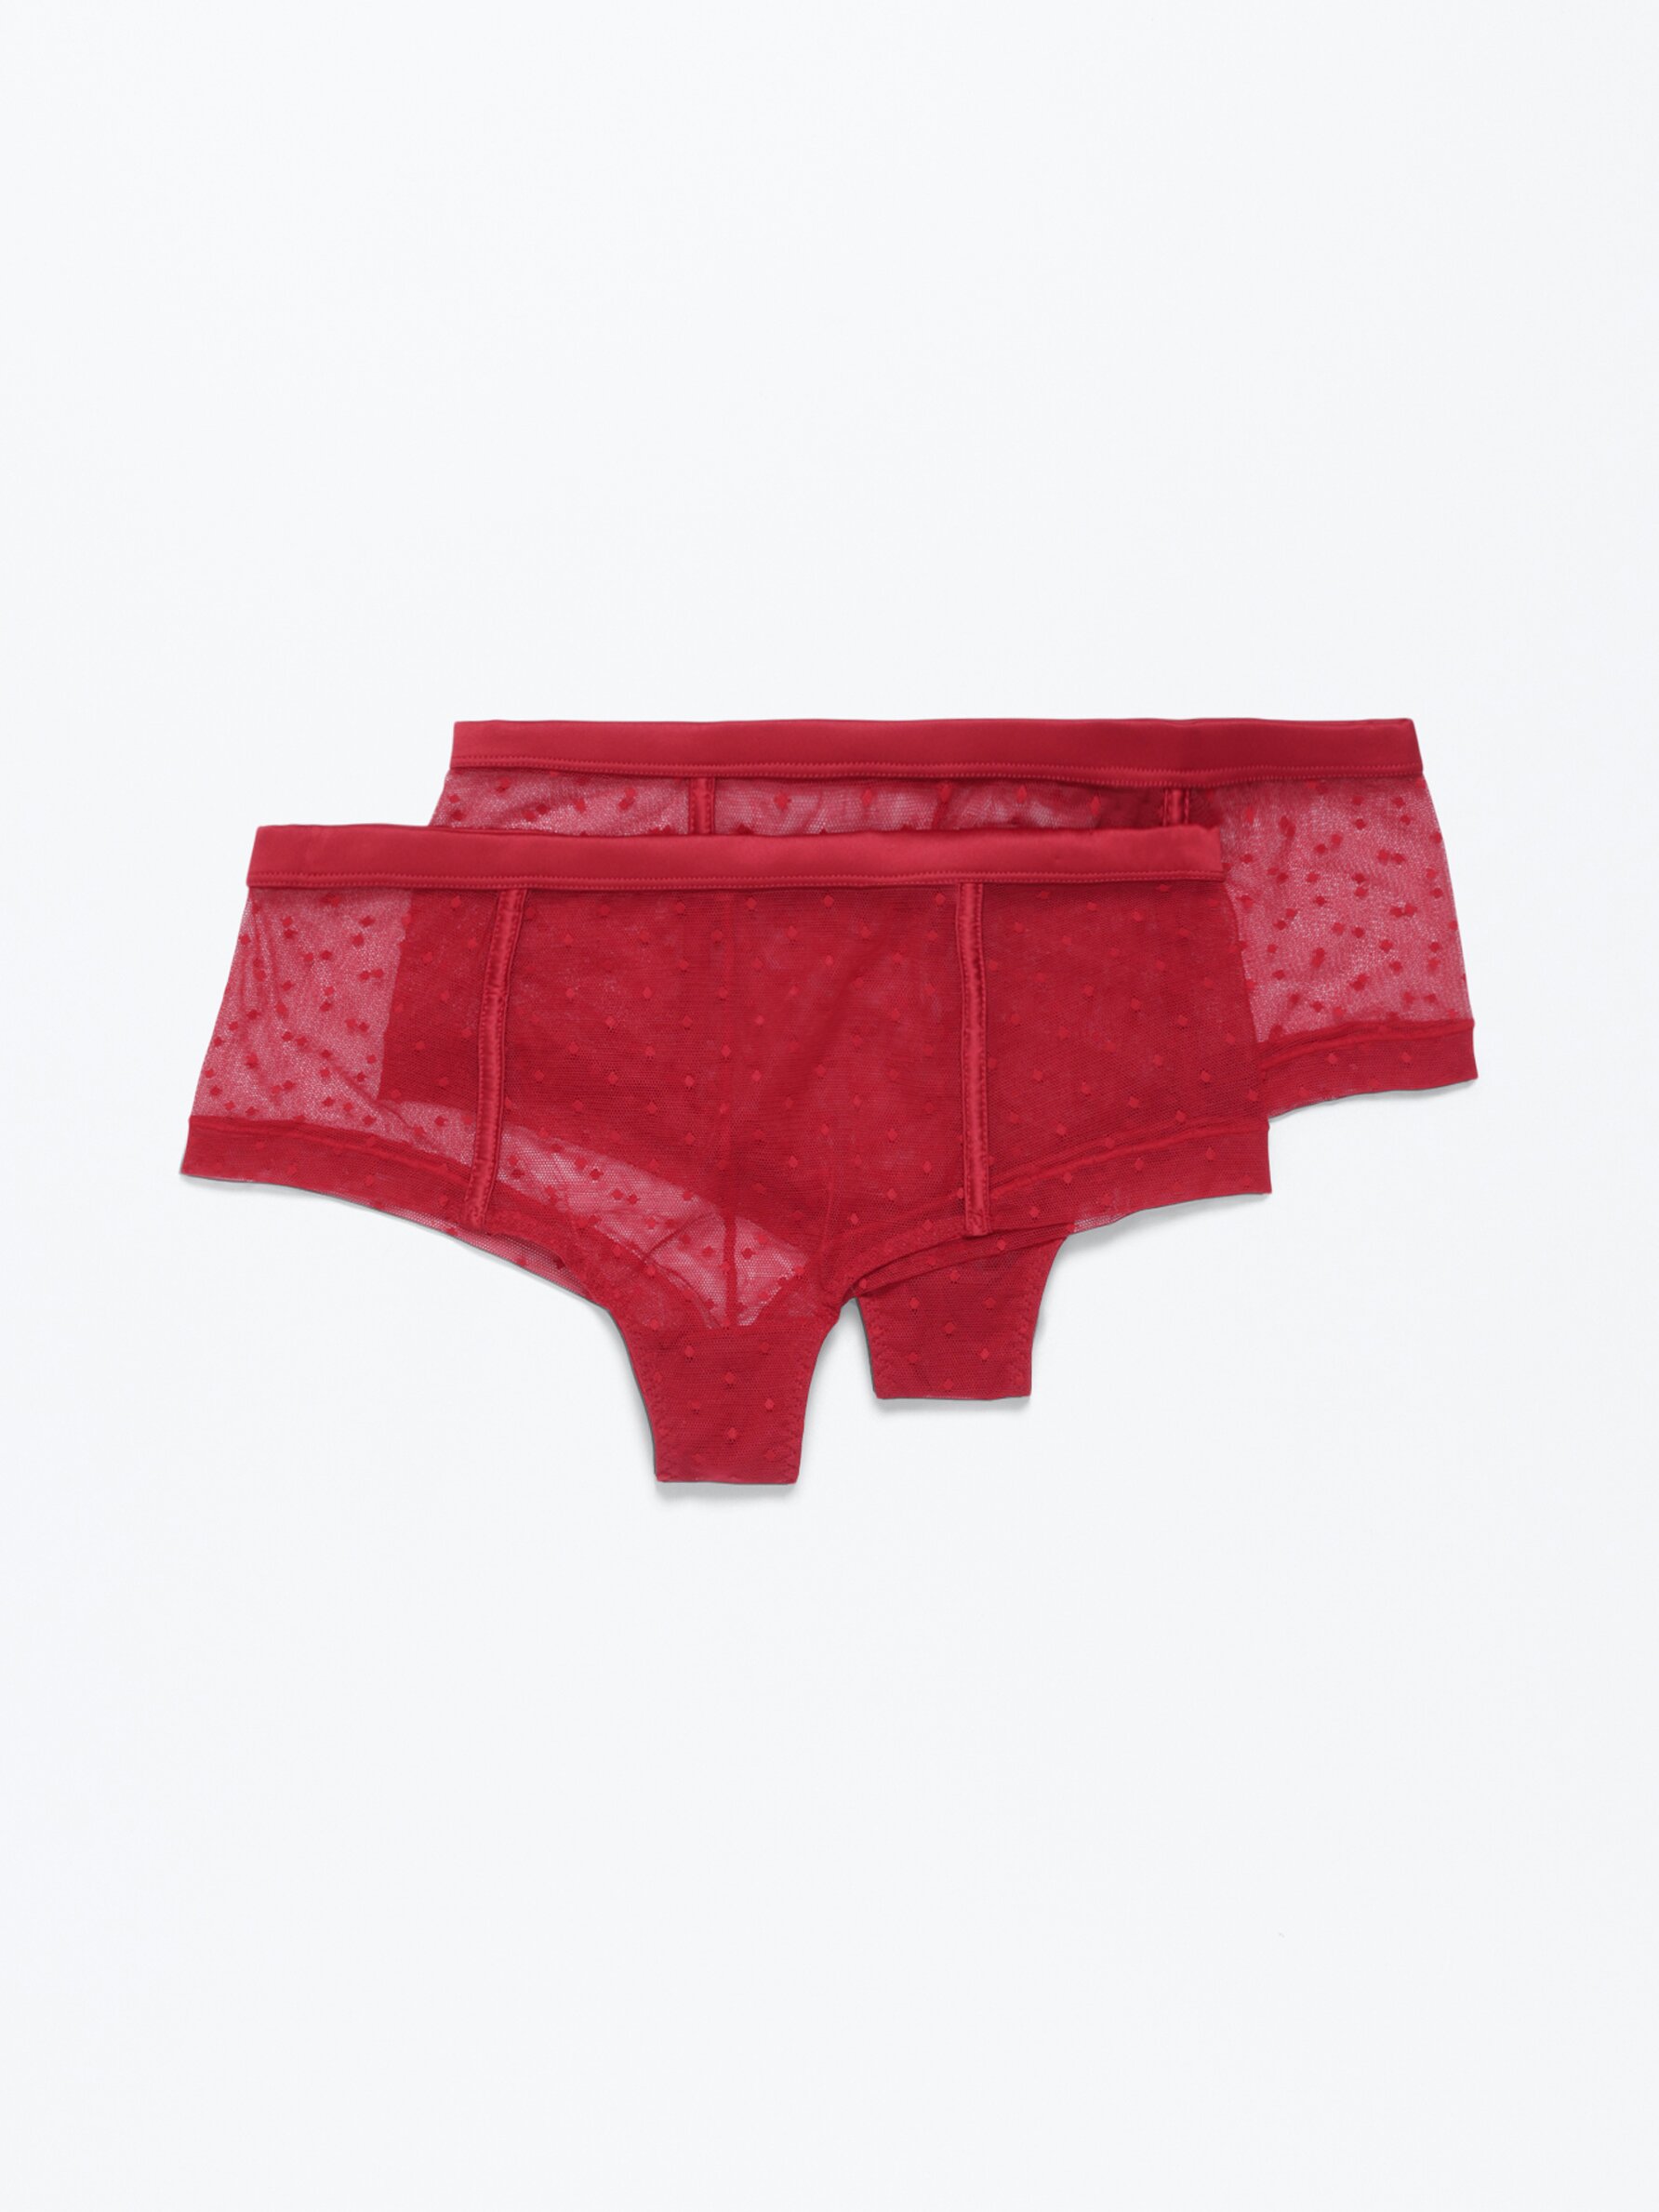 Photo of Red Lacy Underwear on Silky Fabric